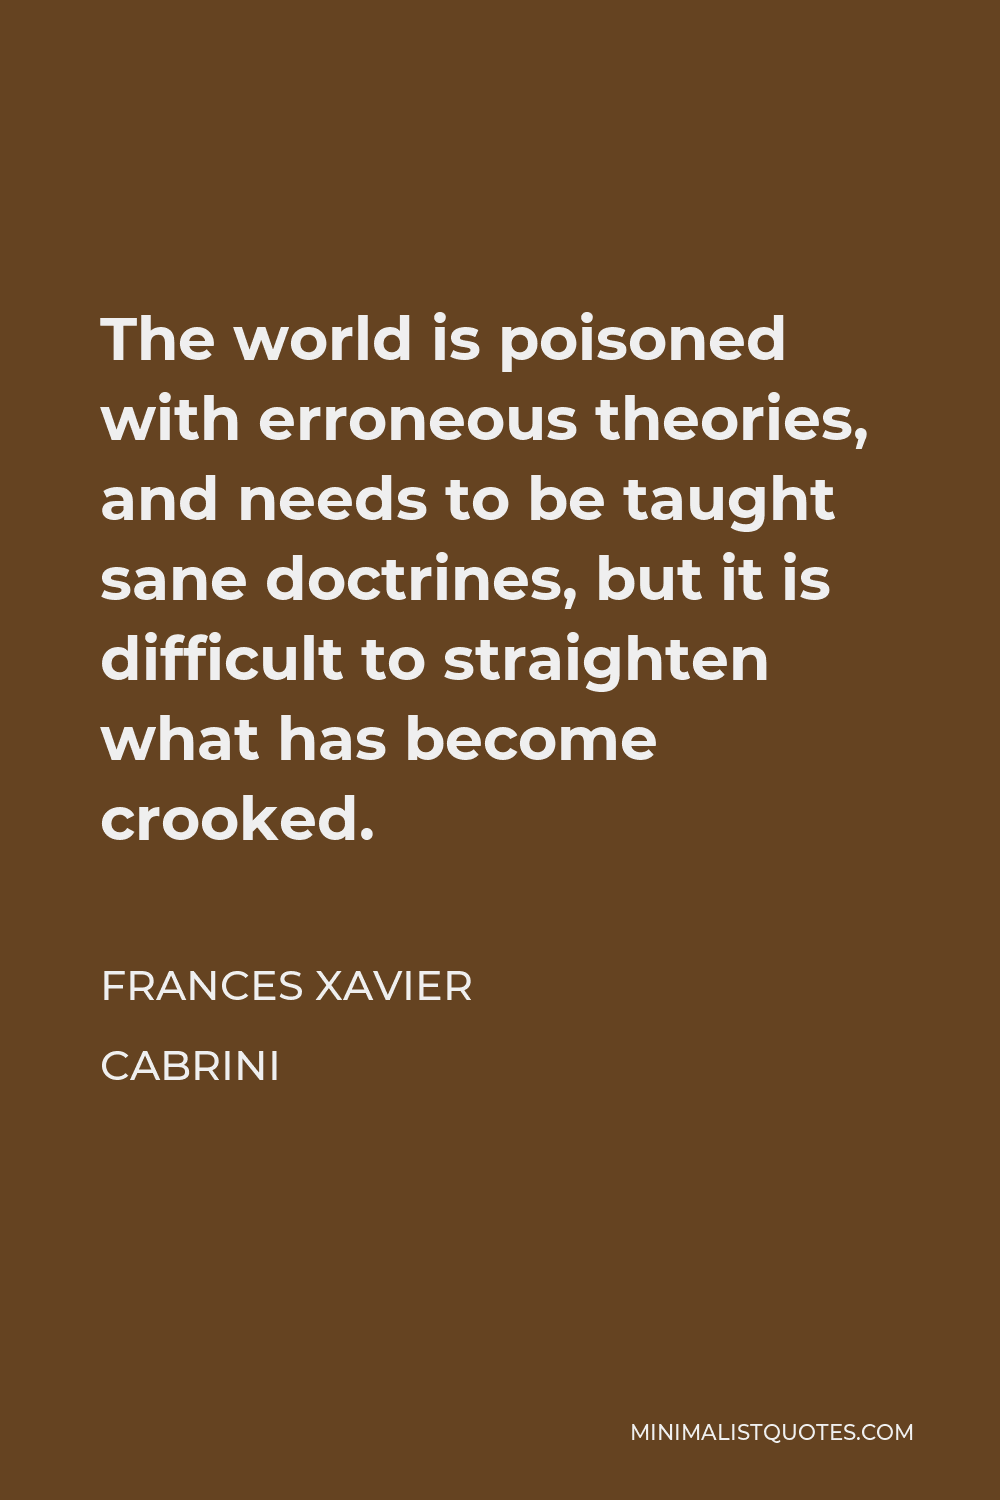 Frances Xavier Cabrini Quote - The world is poisoned with erroneous theories, and needs to be taught sane doctrines, but it is difficult to straighten what has become crooked.